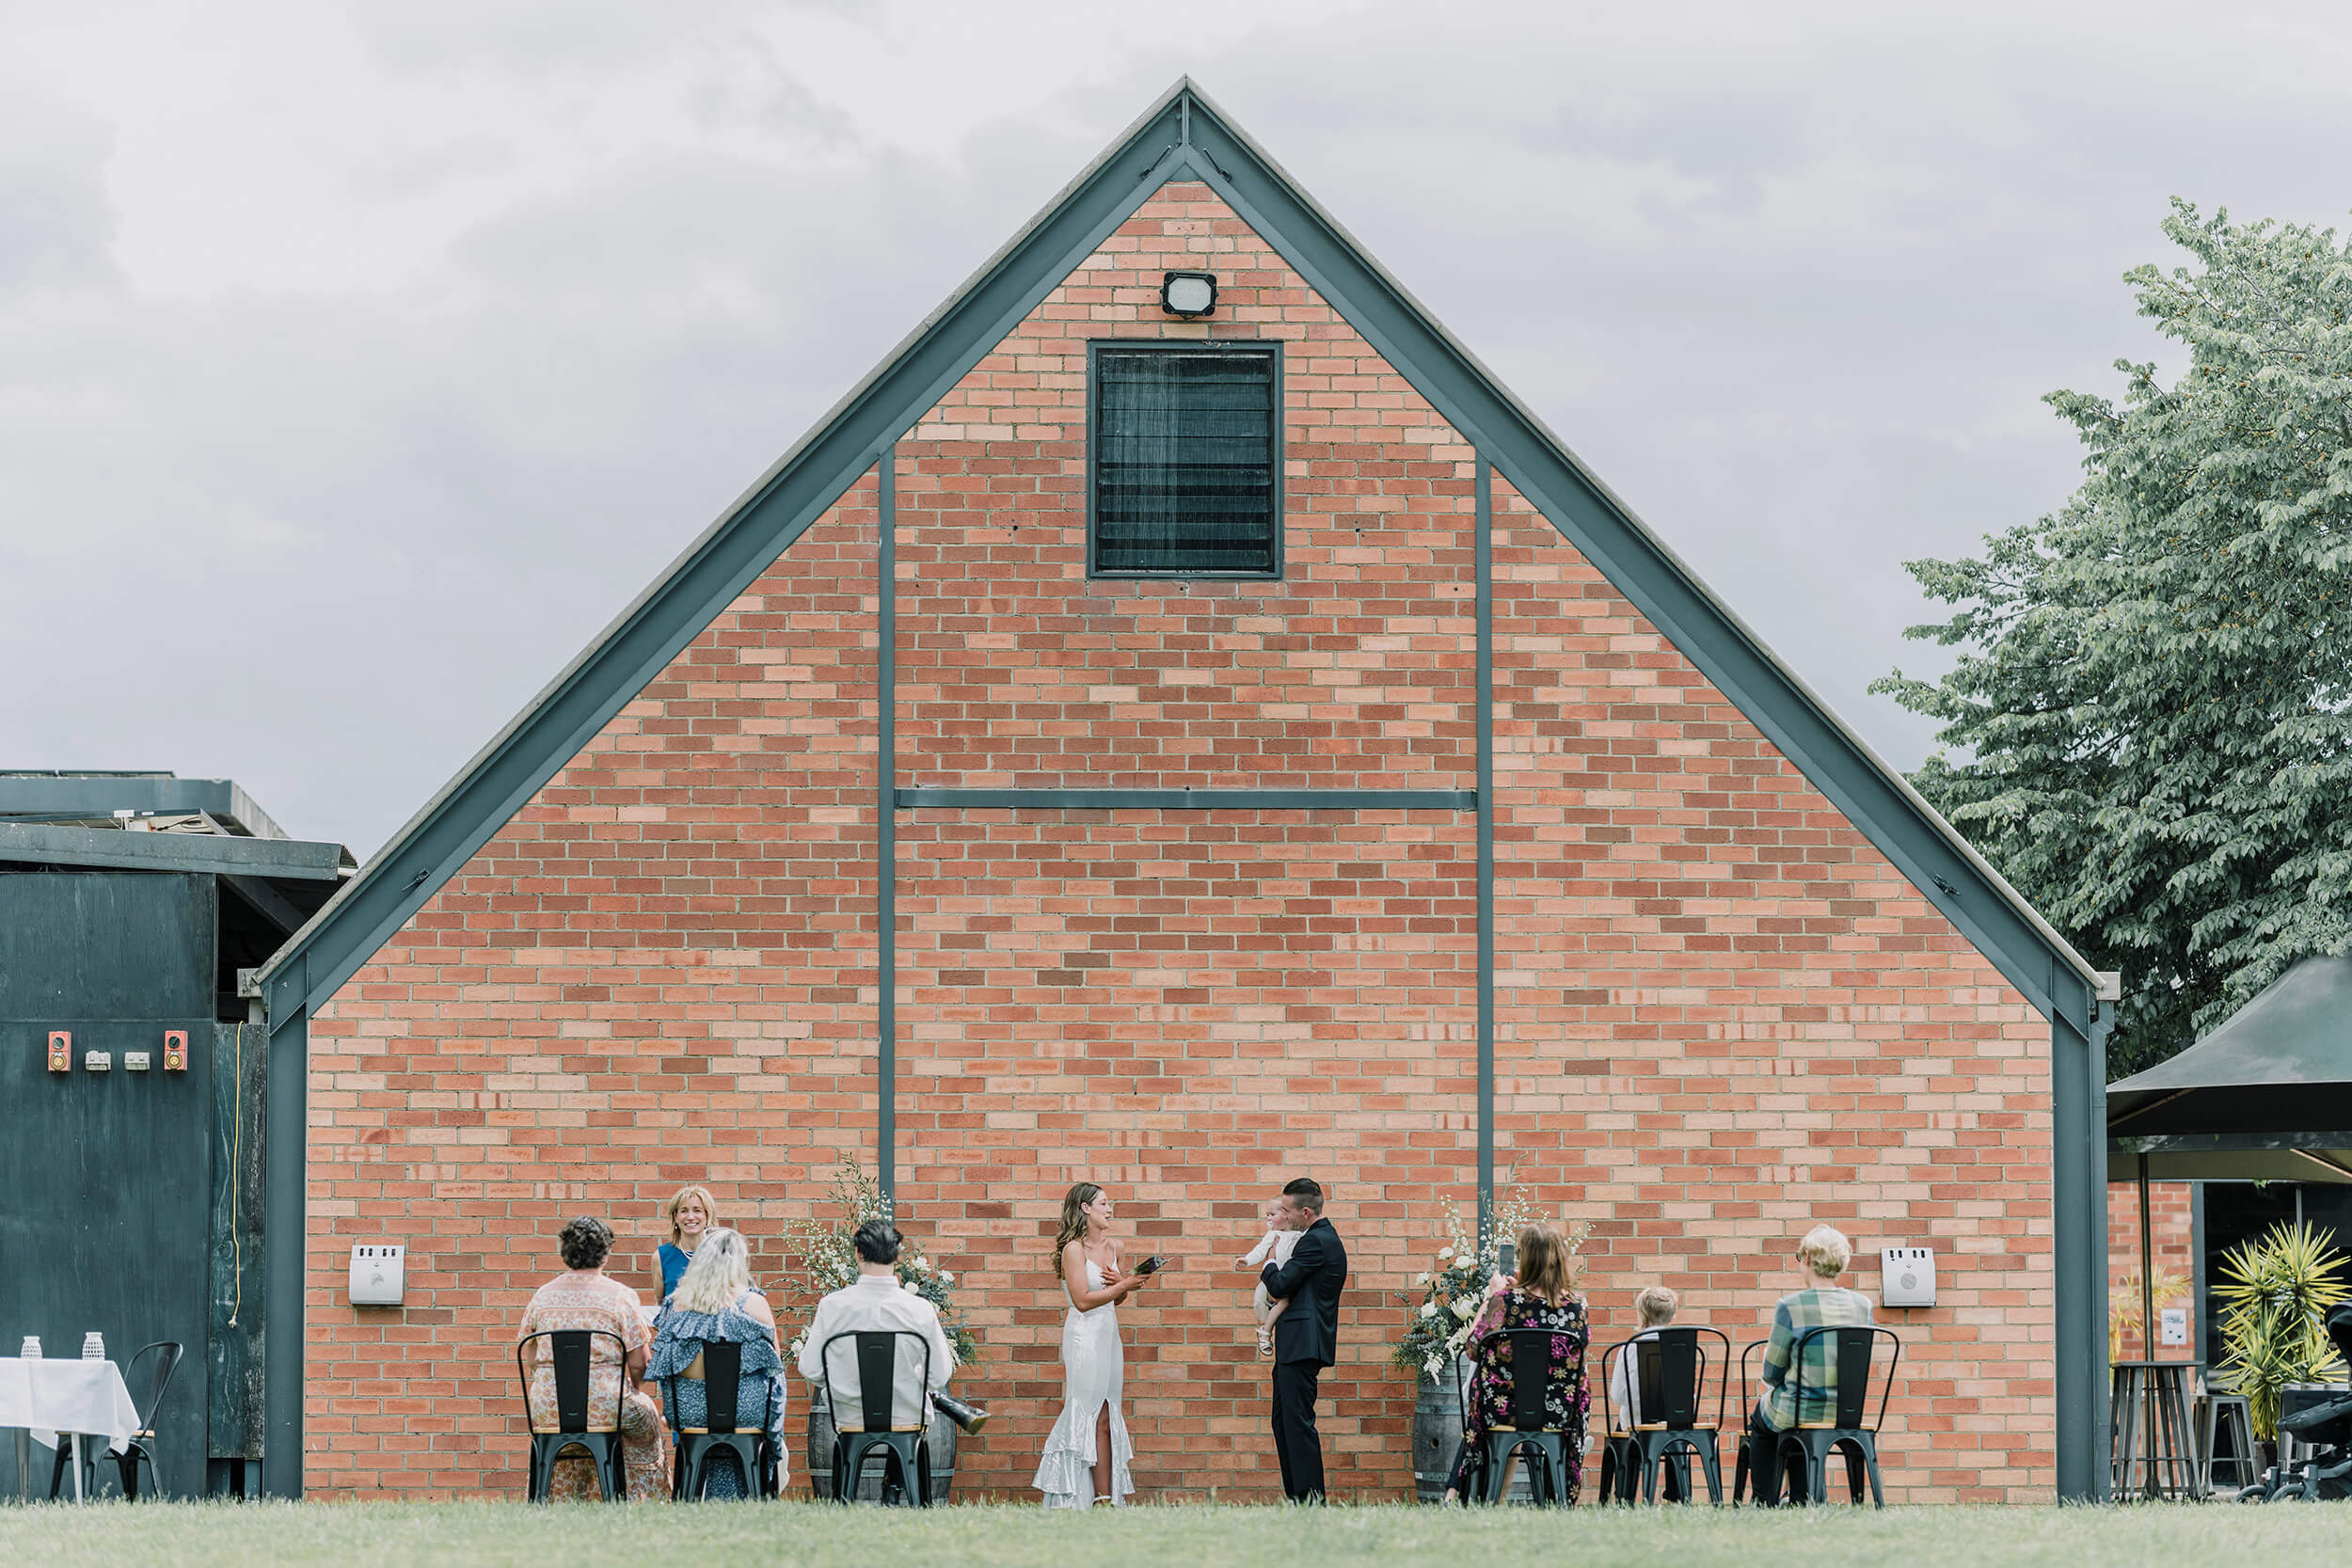 A very intimate wedding ceremony in an outdoor setting with the close friends and family of the bride and groom watching the ceremony. Captured by Black Avenue ProductionsPlanning An Intimate Wedding